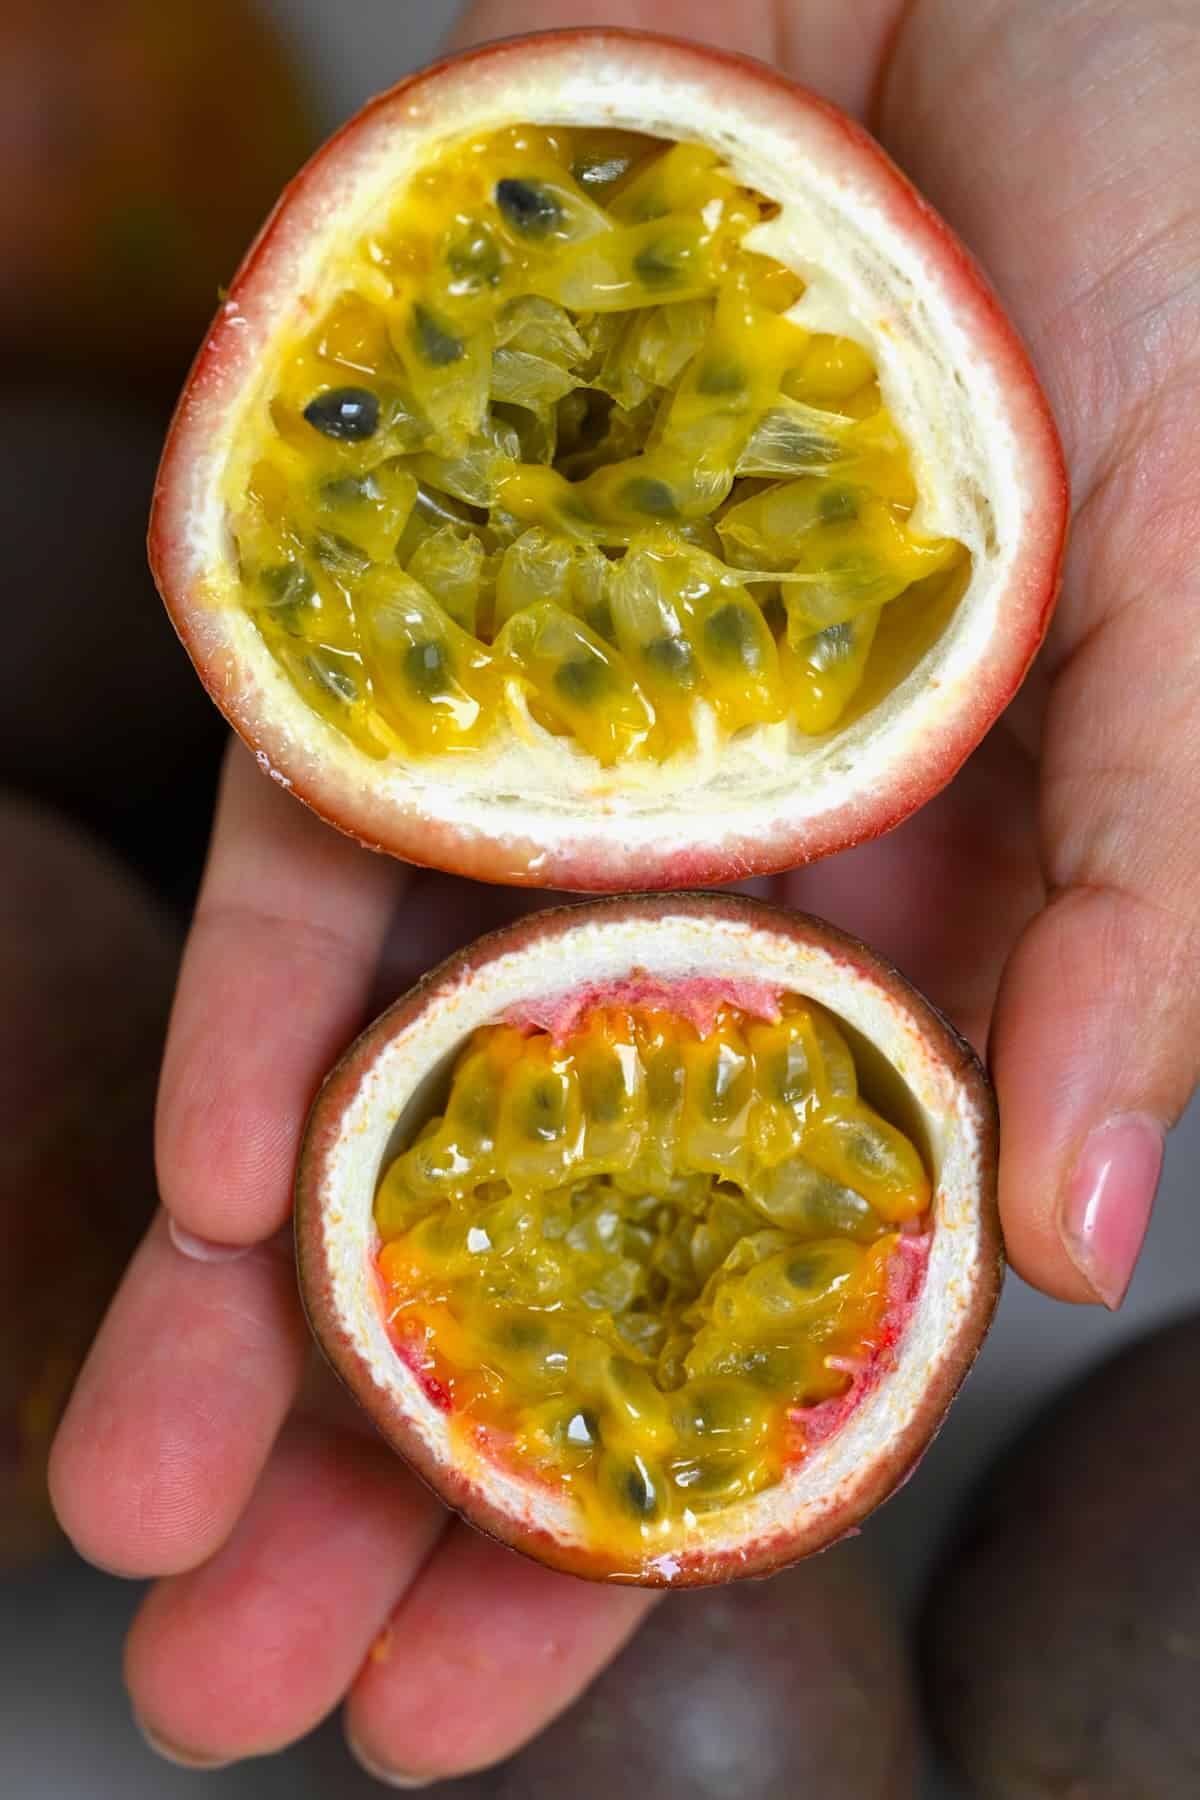 How To Make Passion Fruit Juice (Super Easy!)